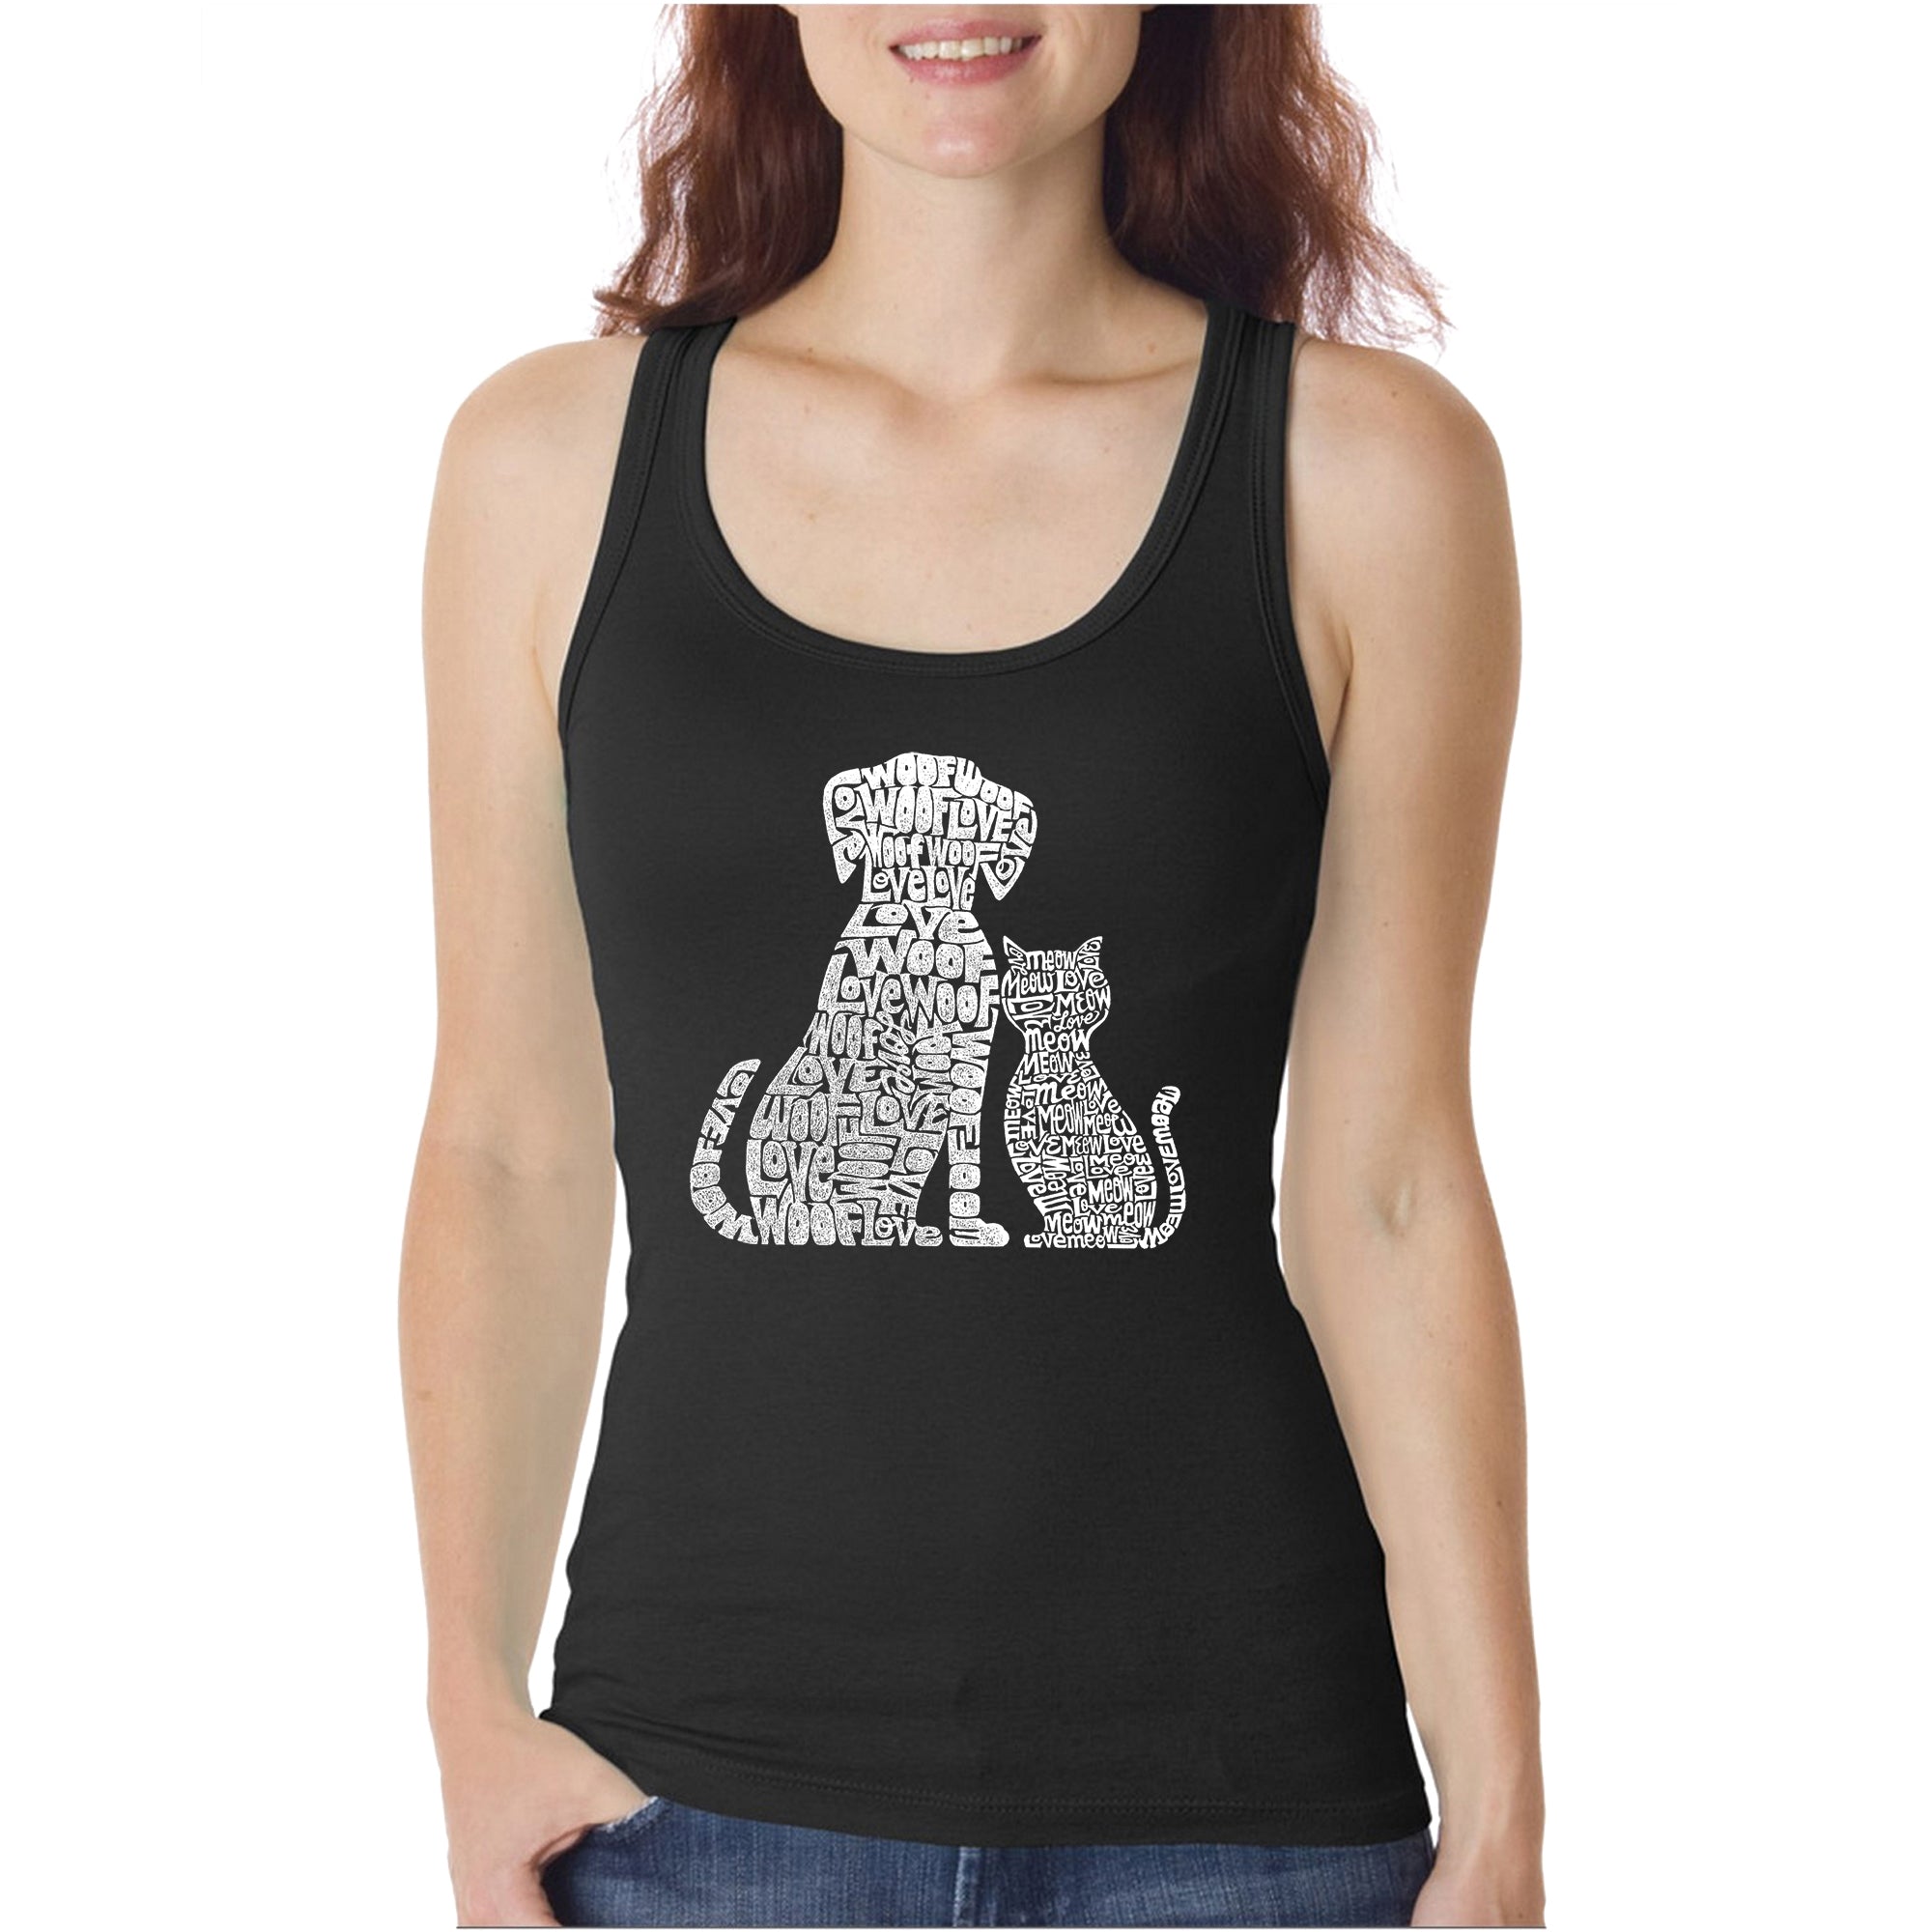 Dogs And Cats - Women's Word Art Tank Top - Large